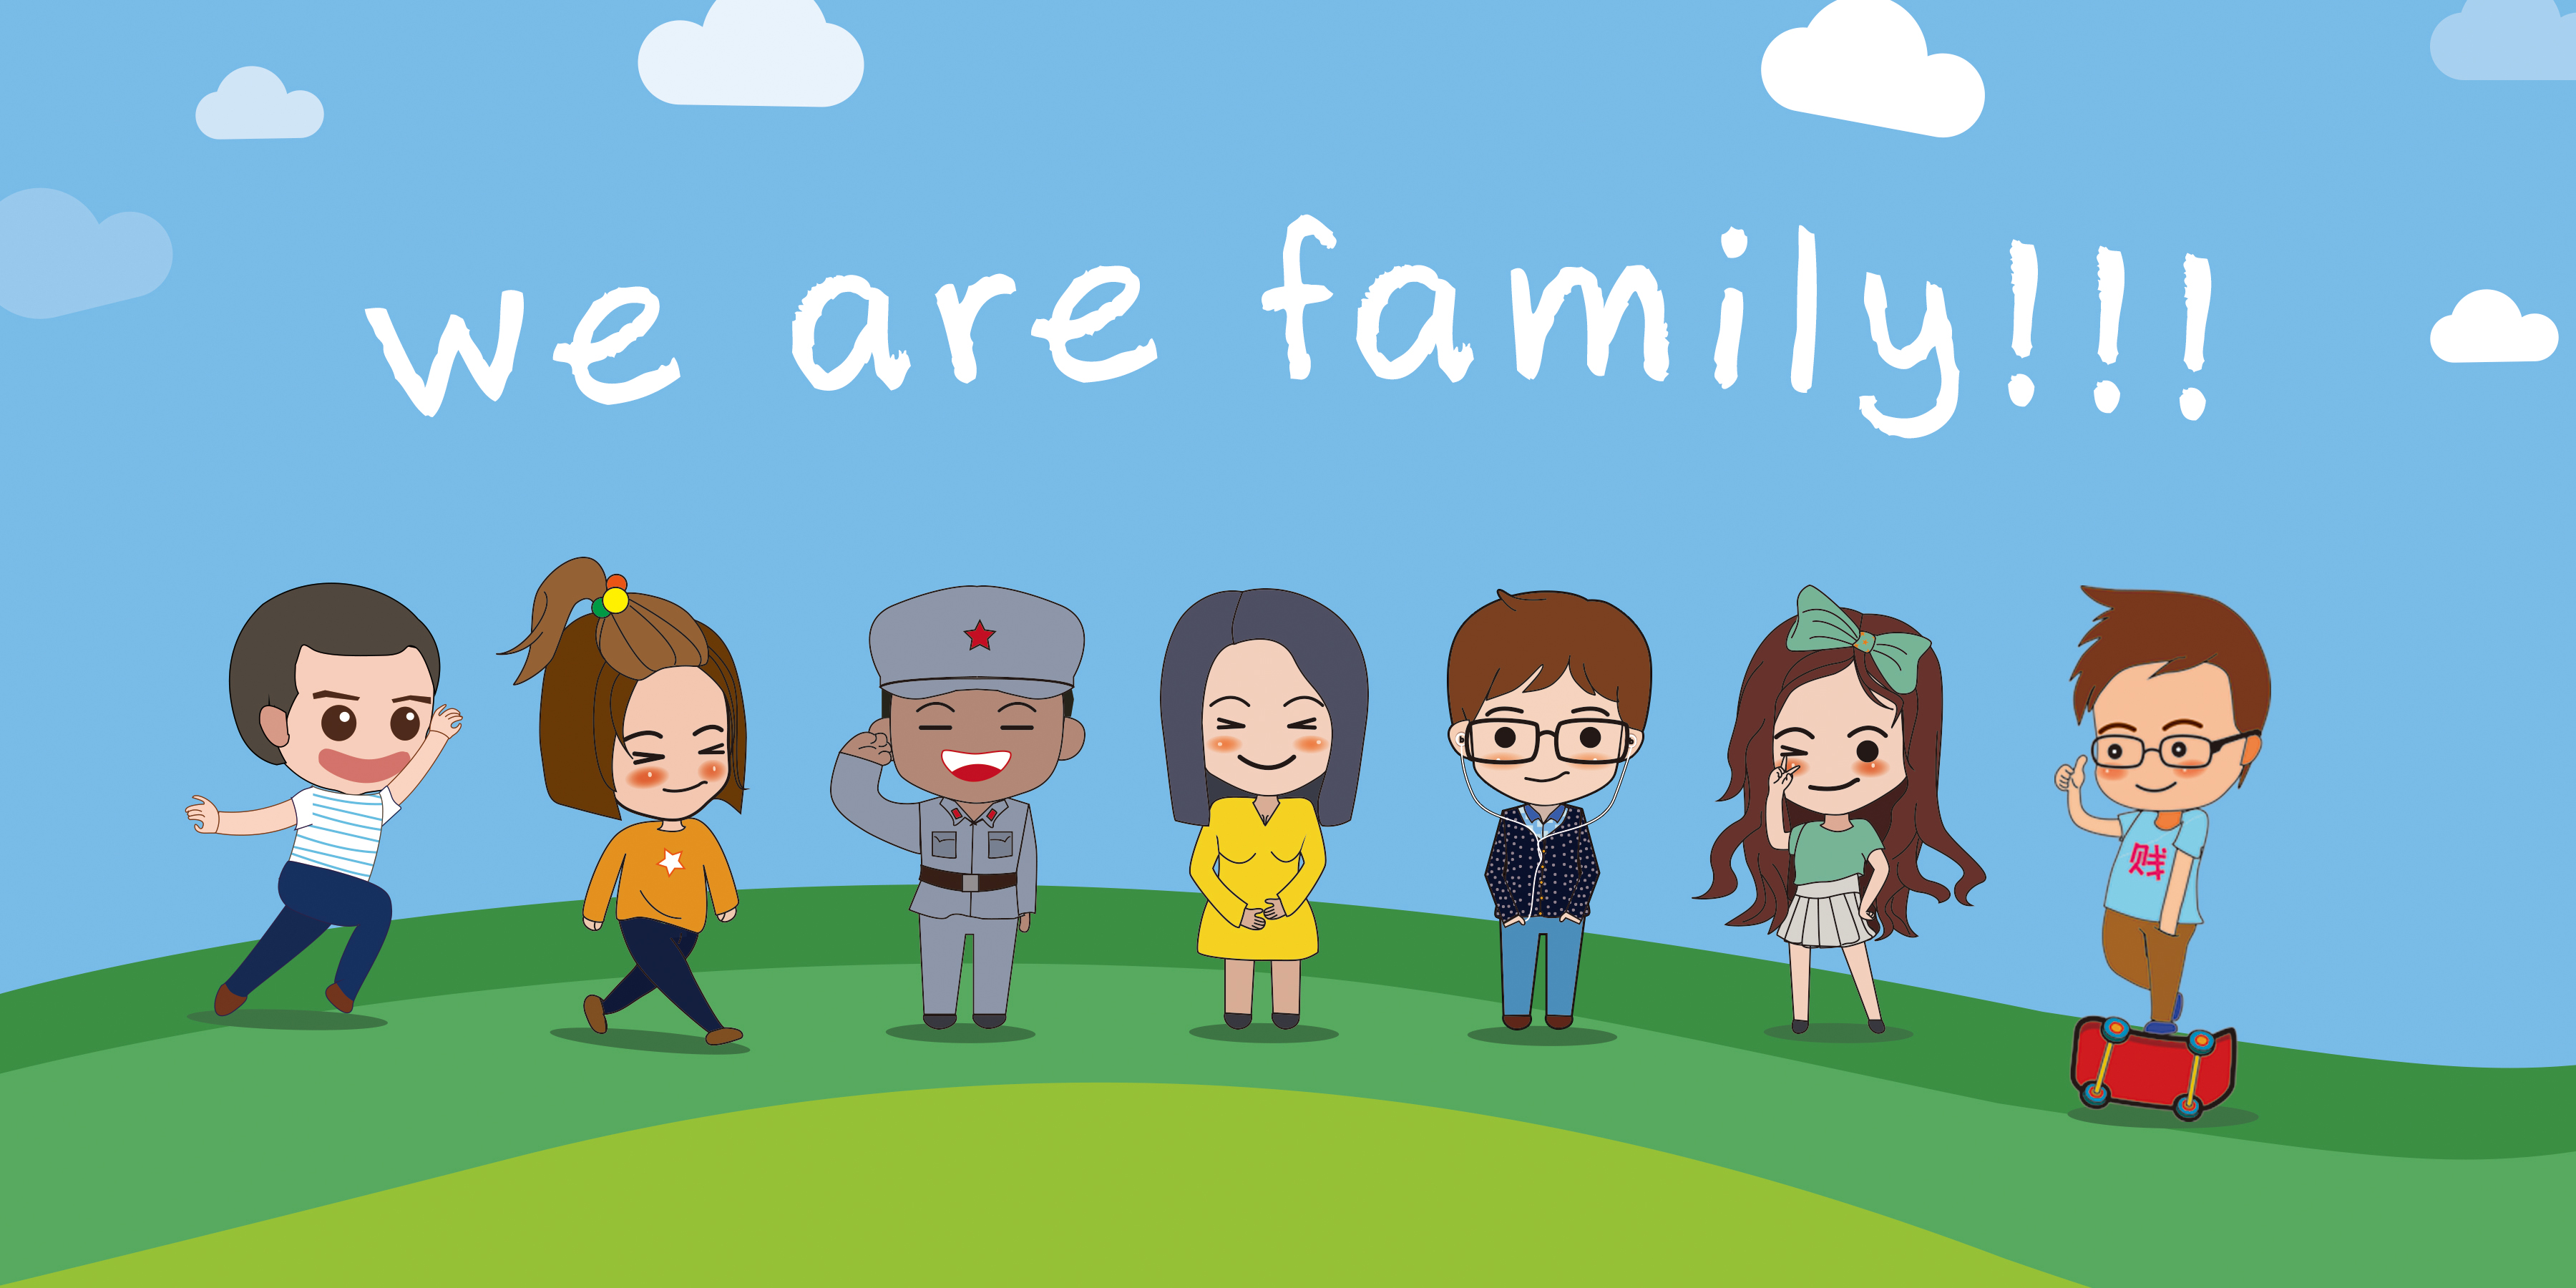 We are happy family. We are Family. Мы семья - we are Family. Картинки мы семья we are Family. We are Family канал мы семья.